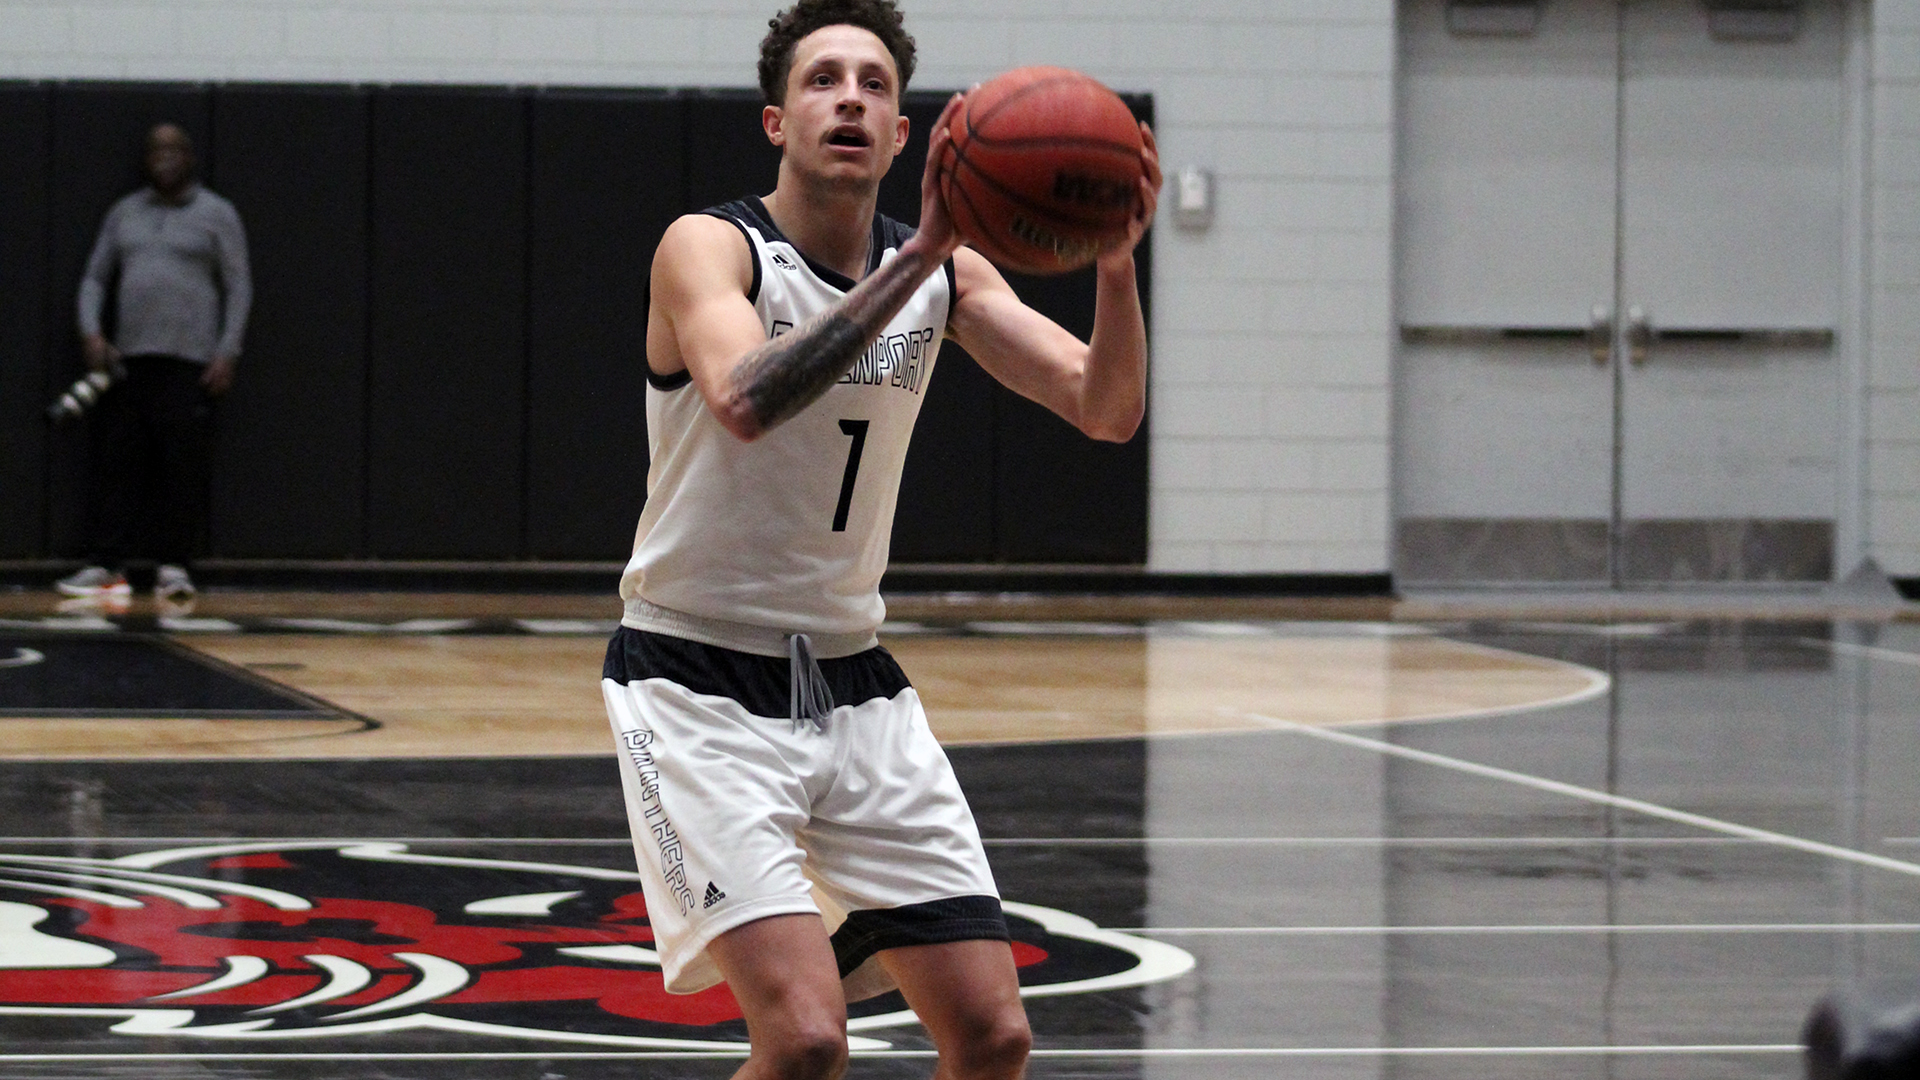 Davenport's win streak ended by Parkside in GLIAC action